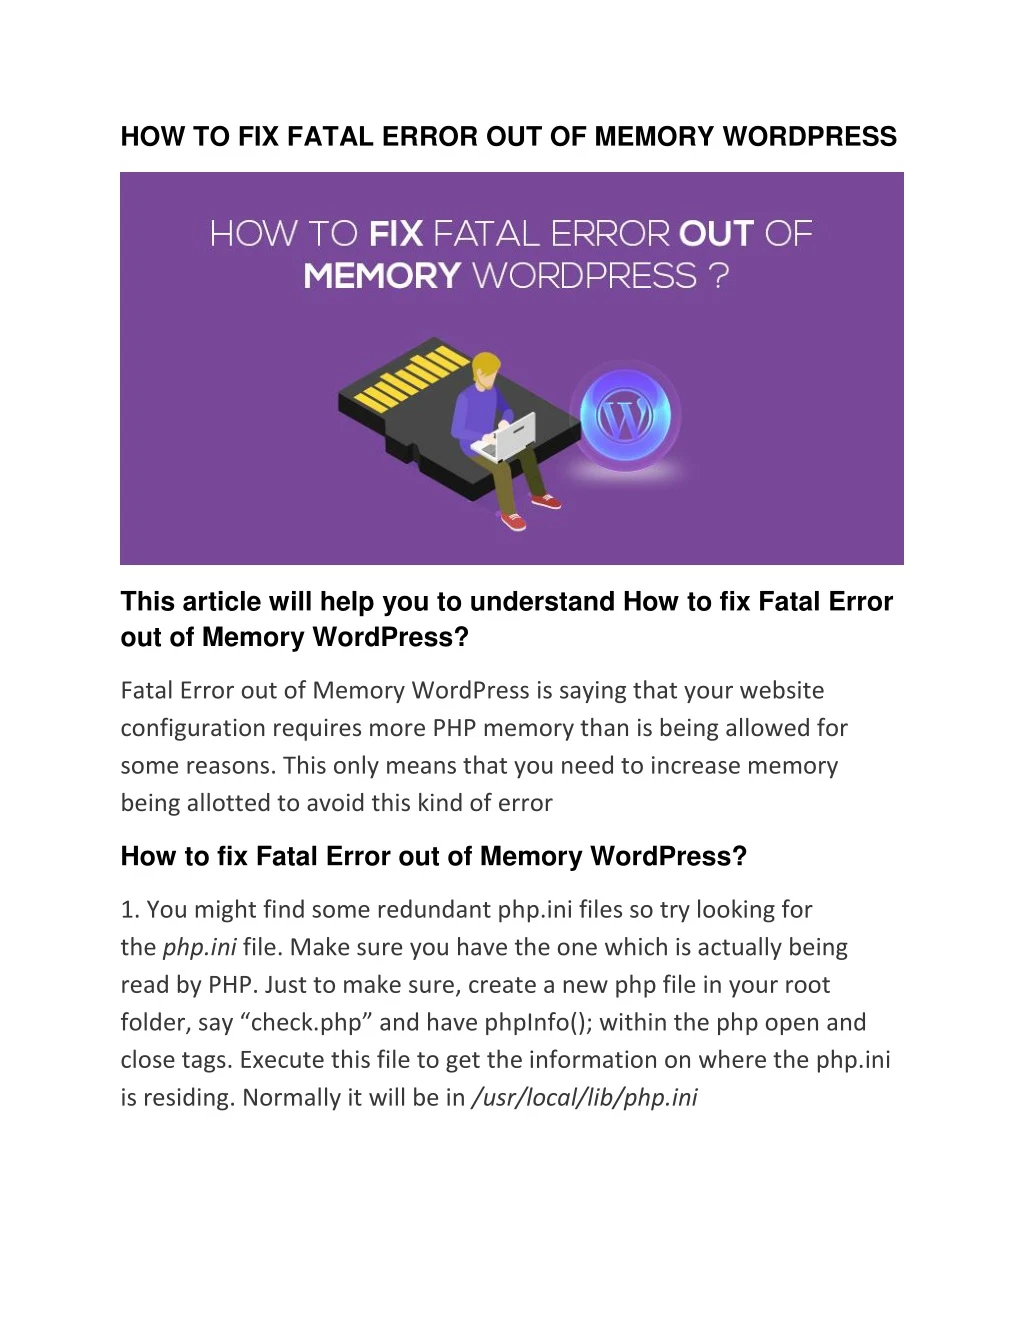 how to fix fatal error out of memory wordpress